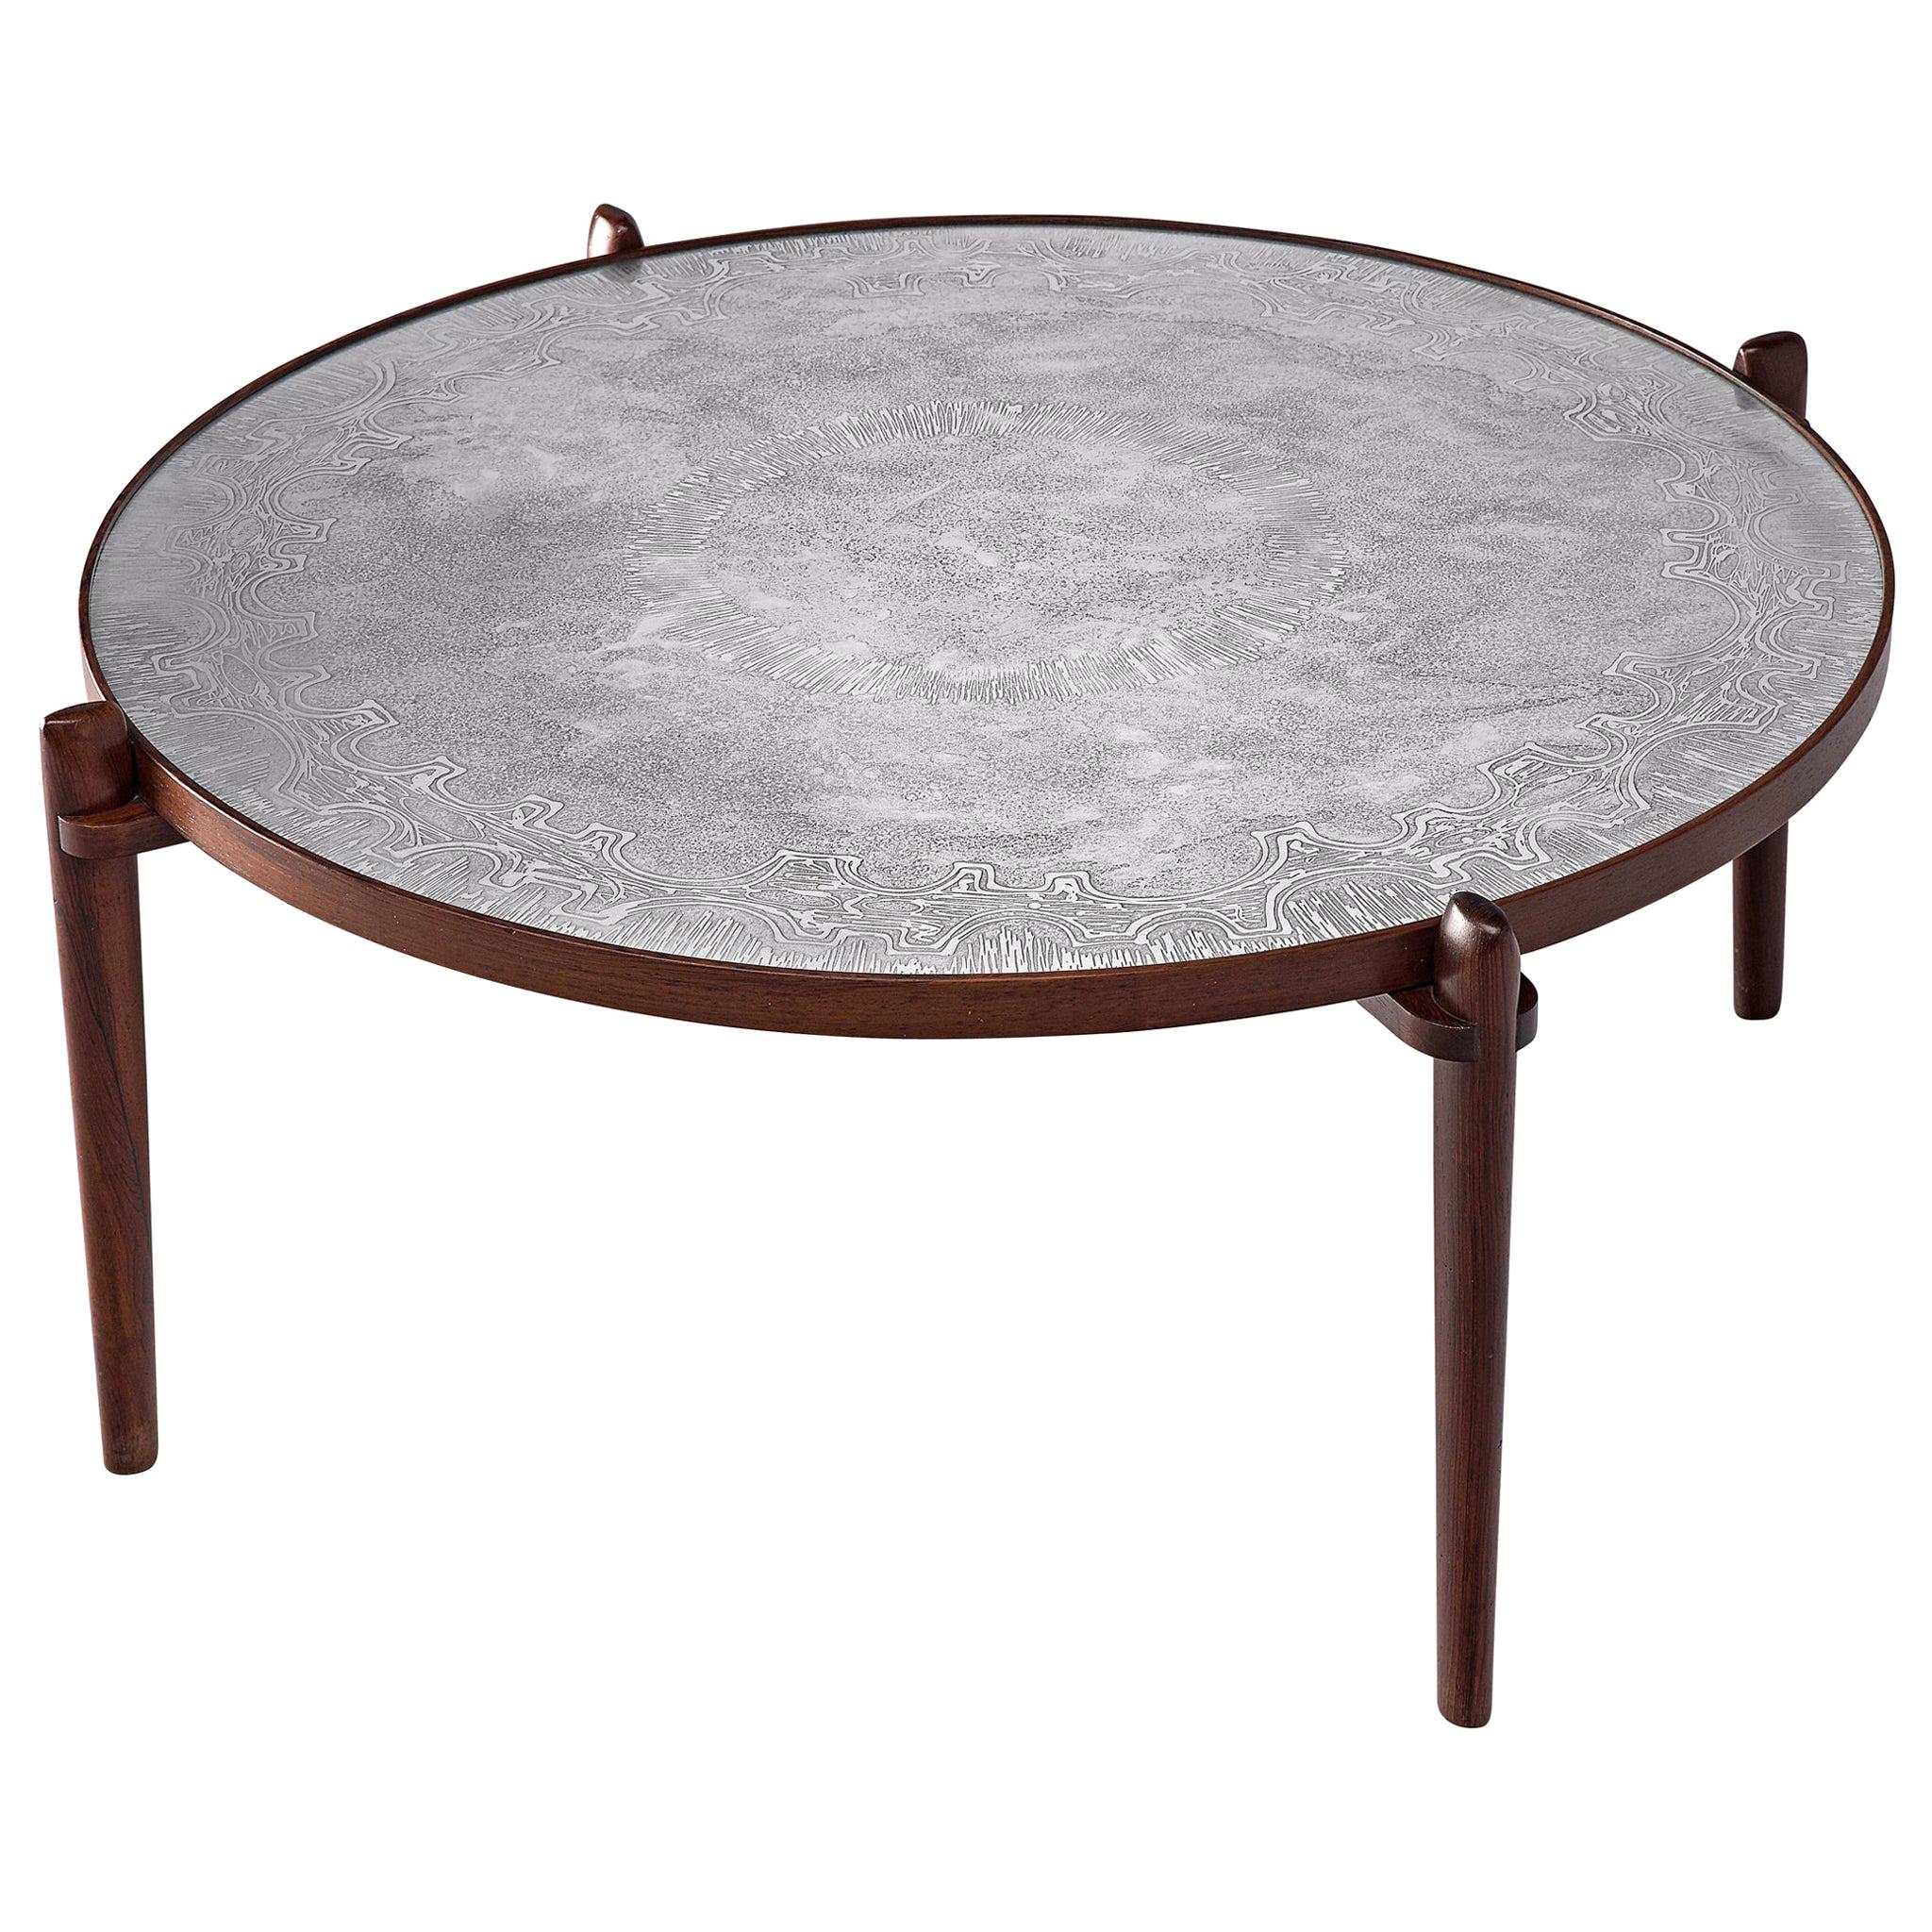 Heinz Lilienthal Coffee Table with Etched Table Top